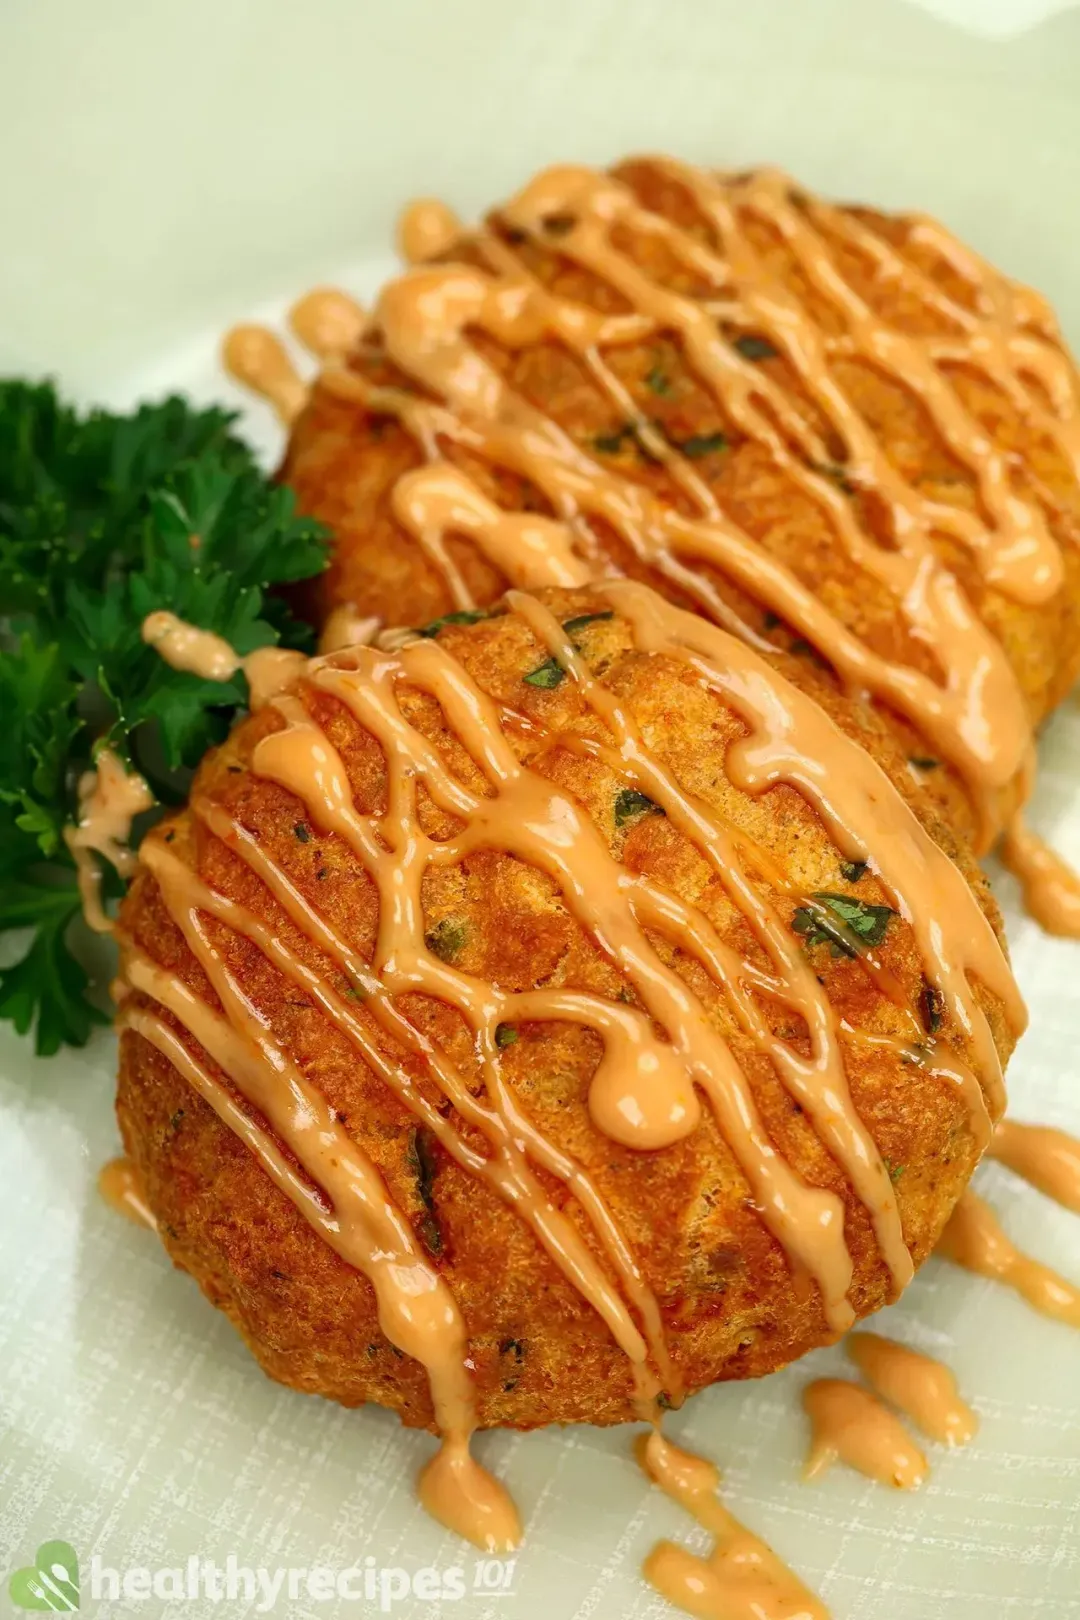 A close up picture of two air fryer salmon patties drizzled with sauce on top and garnished with some parsley.